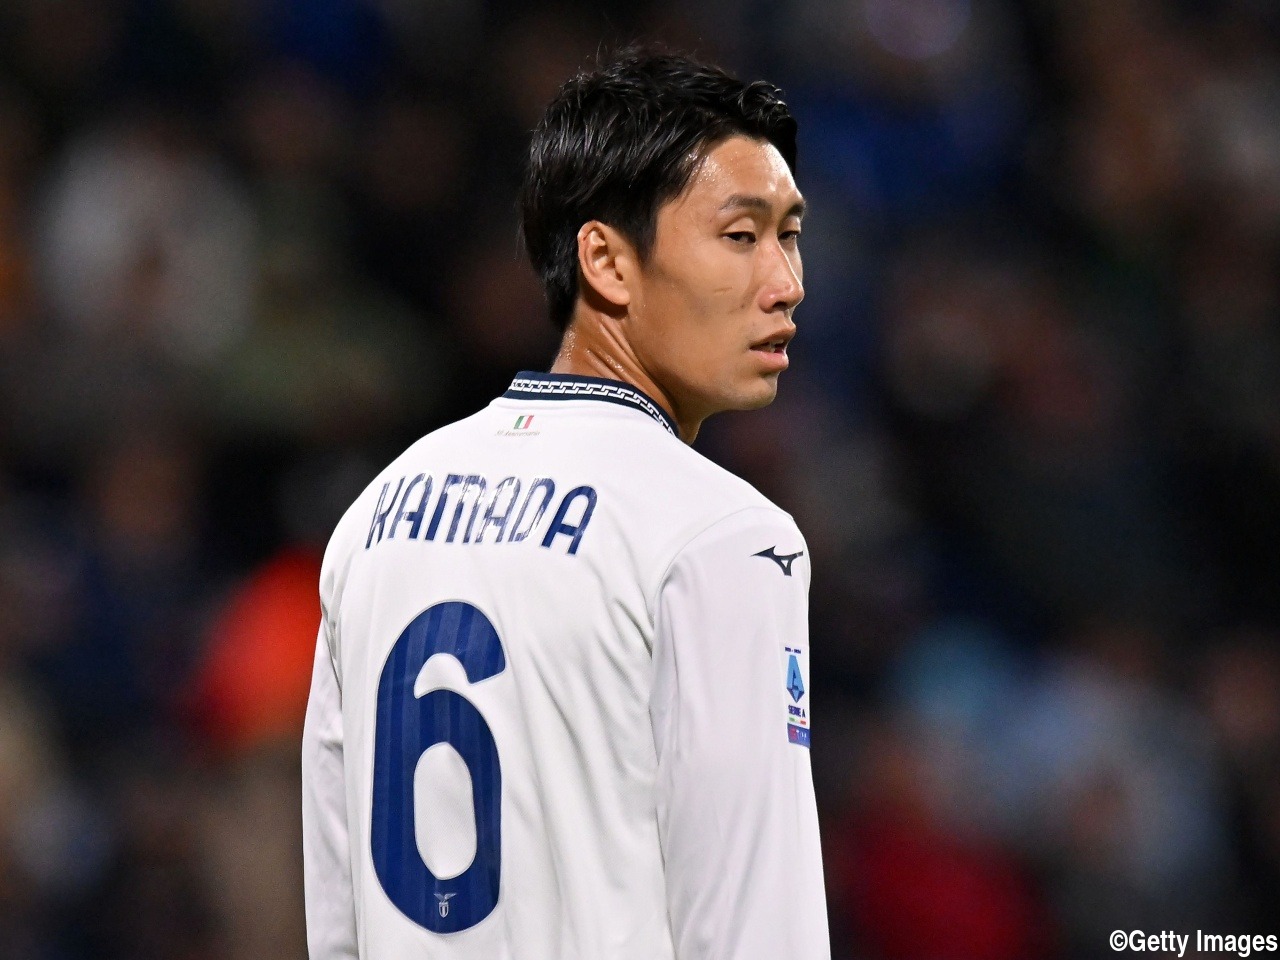 Atalanta and Napoli will have to tweak their midfield in the summer and are keeping tabs on Daichi Kamada, who could become a free agent in June.